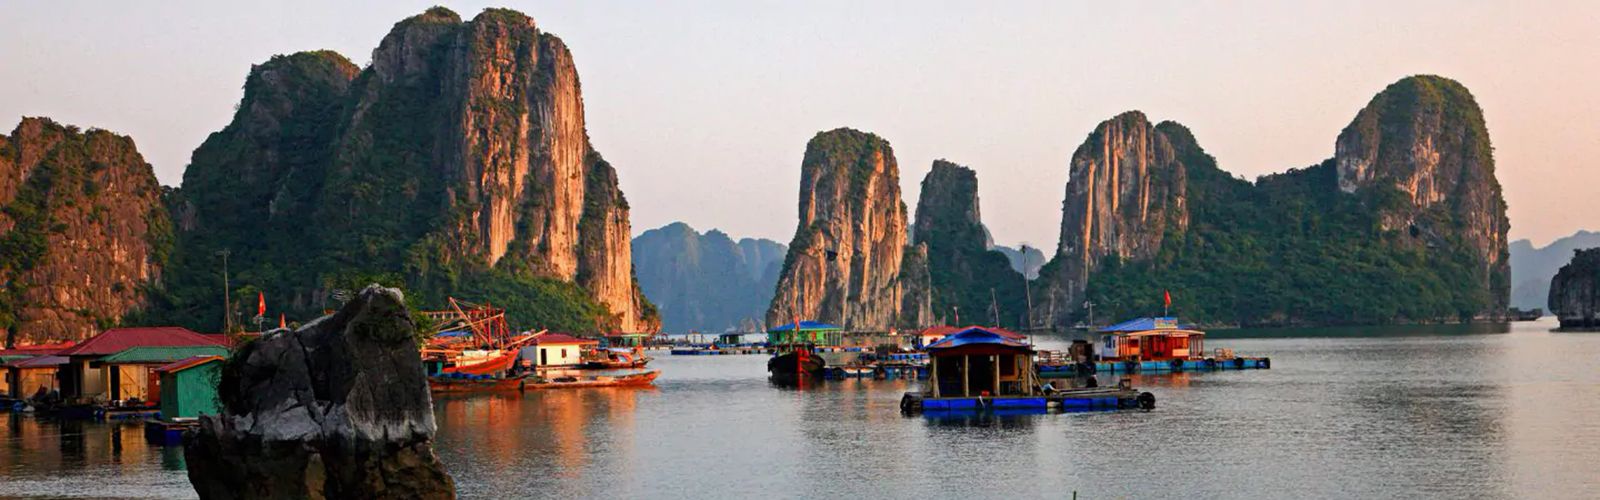 Halong Travel Guide | Asianventure Tours